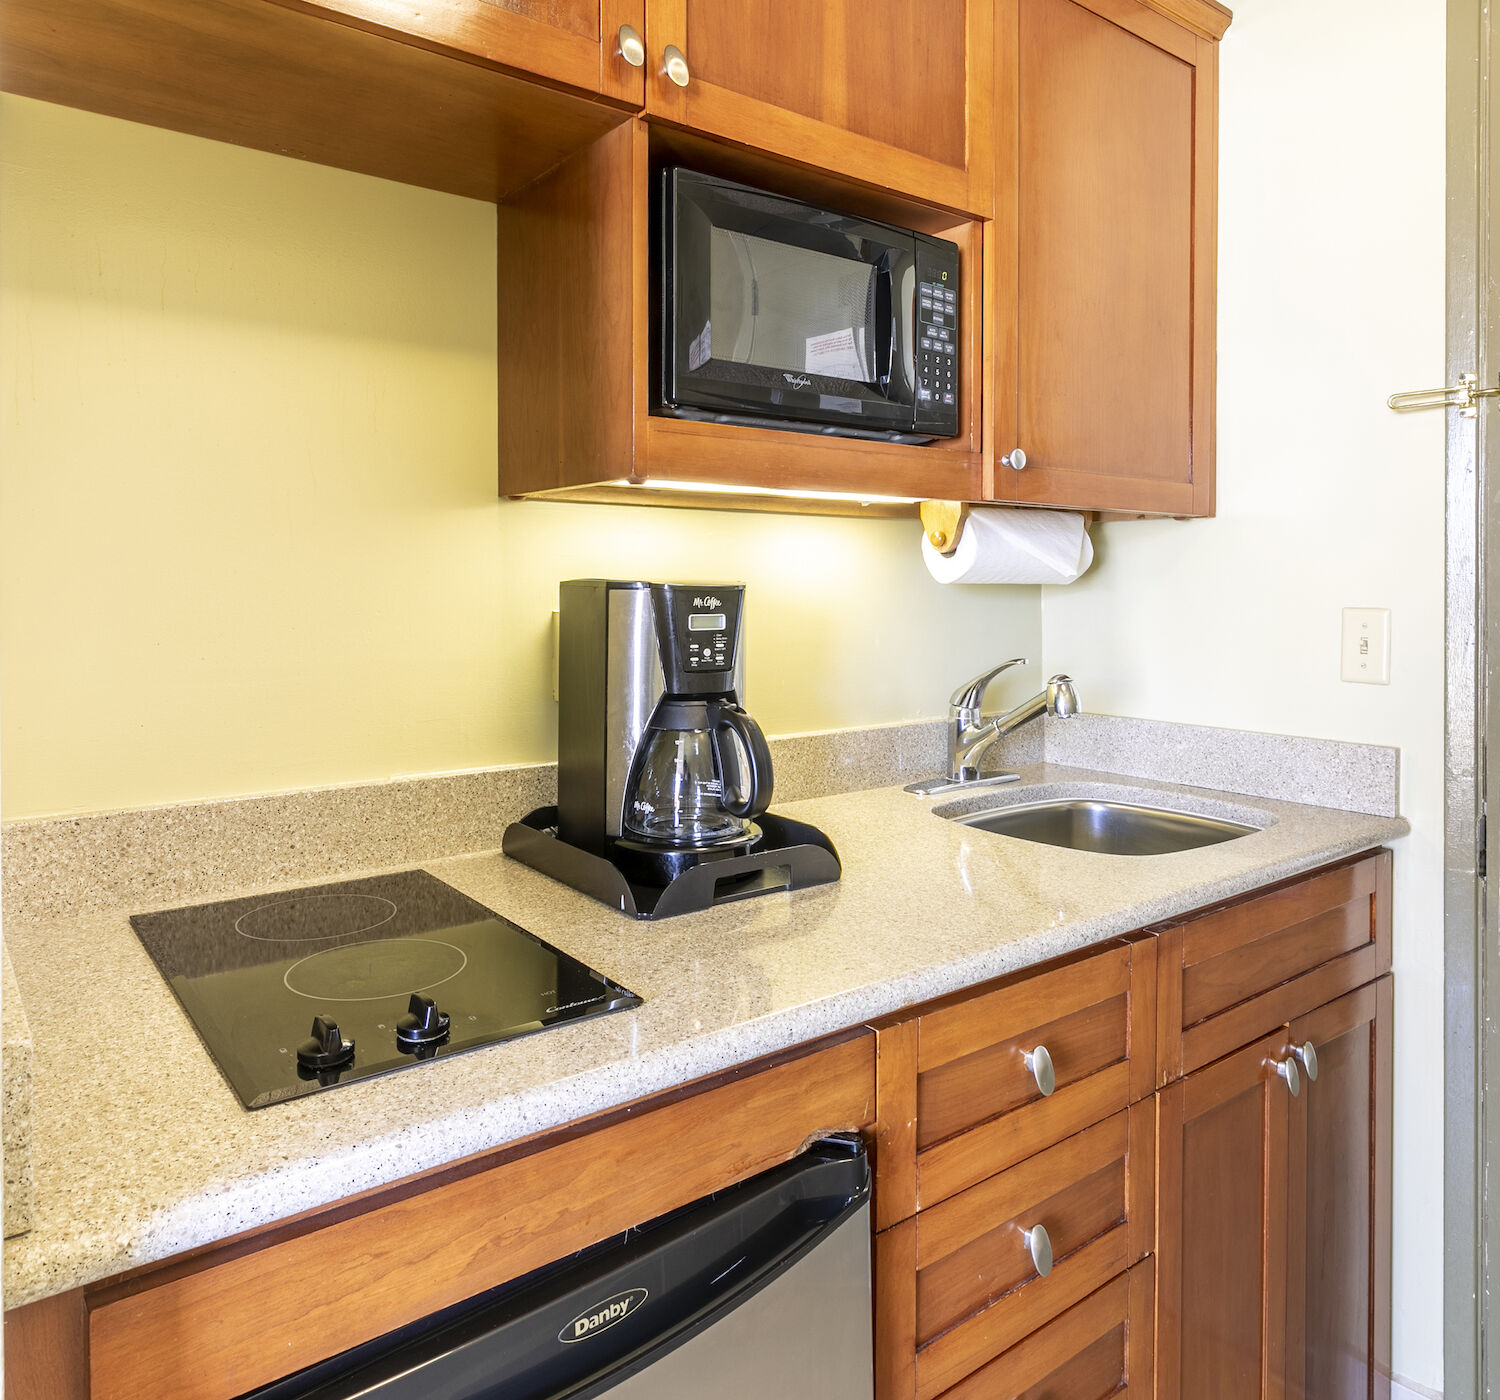 A compact kitchen area with a sink, stovetop, coffee maker, microwave, and a mini-fridge, featuring wooden cabinetry and a beige countertop, is shown.